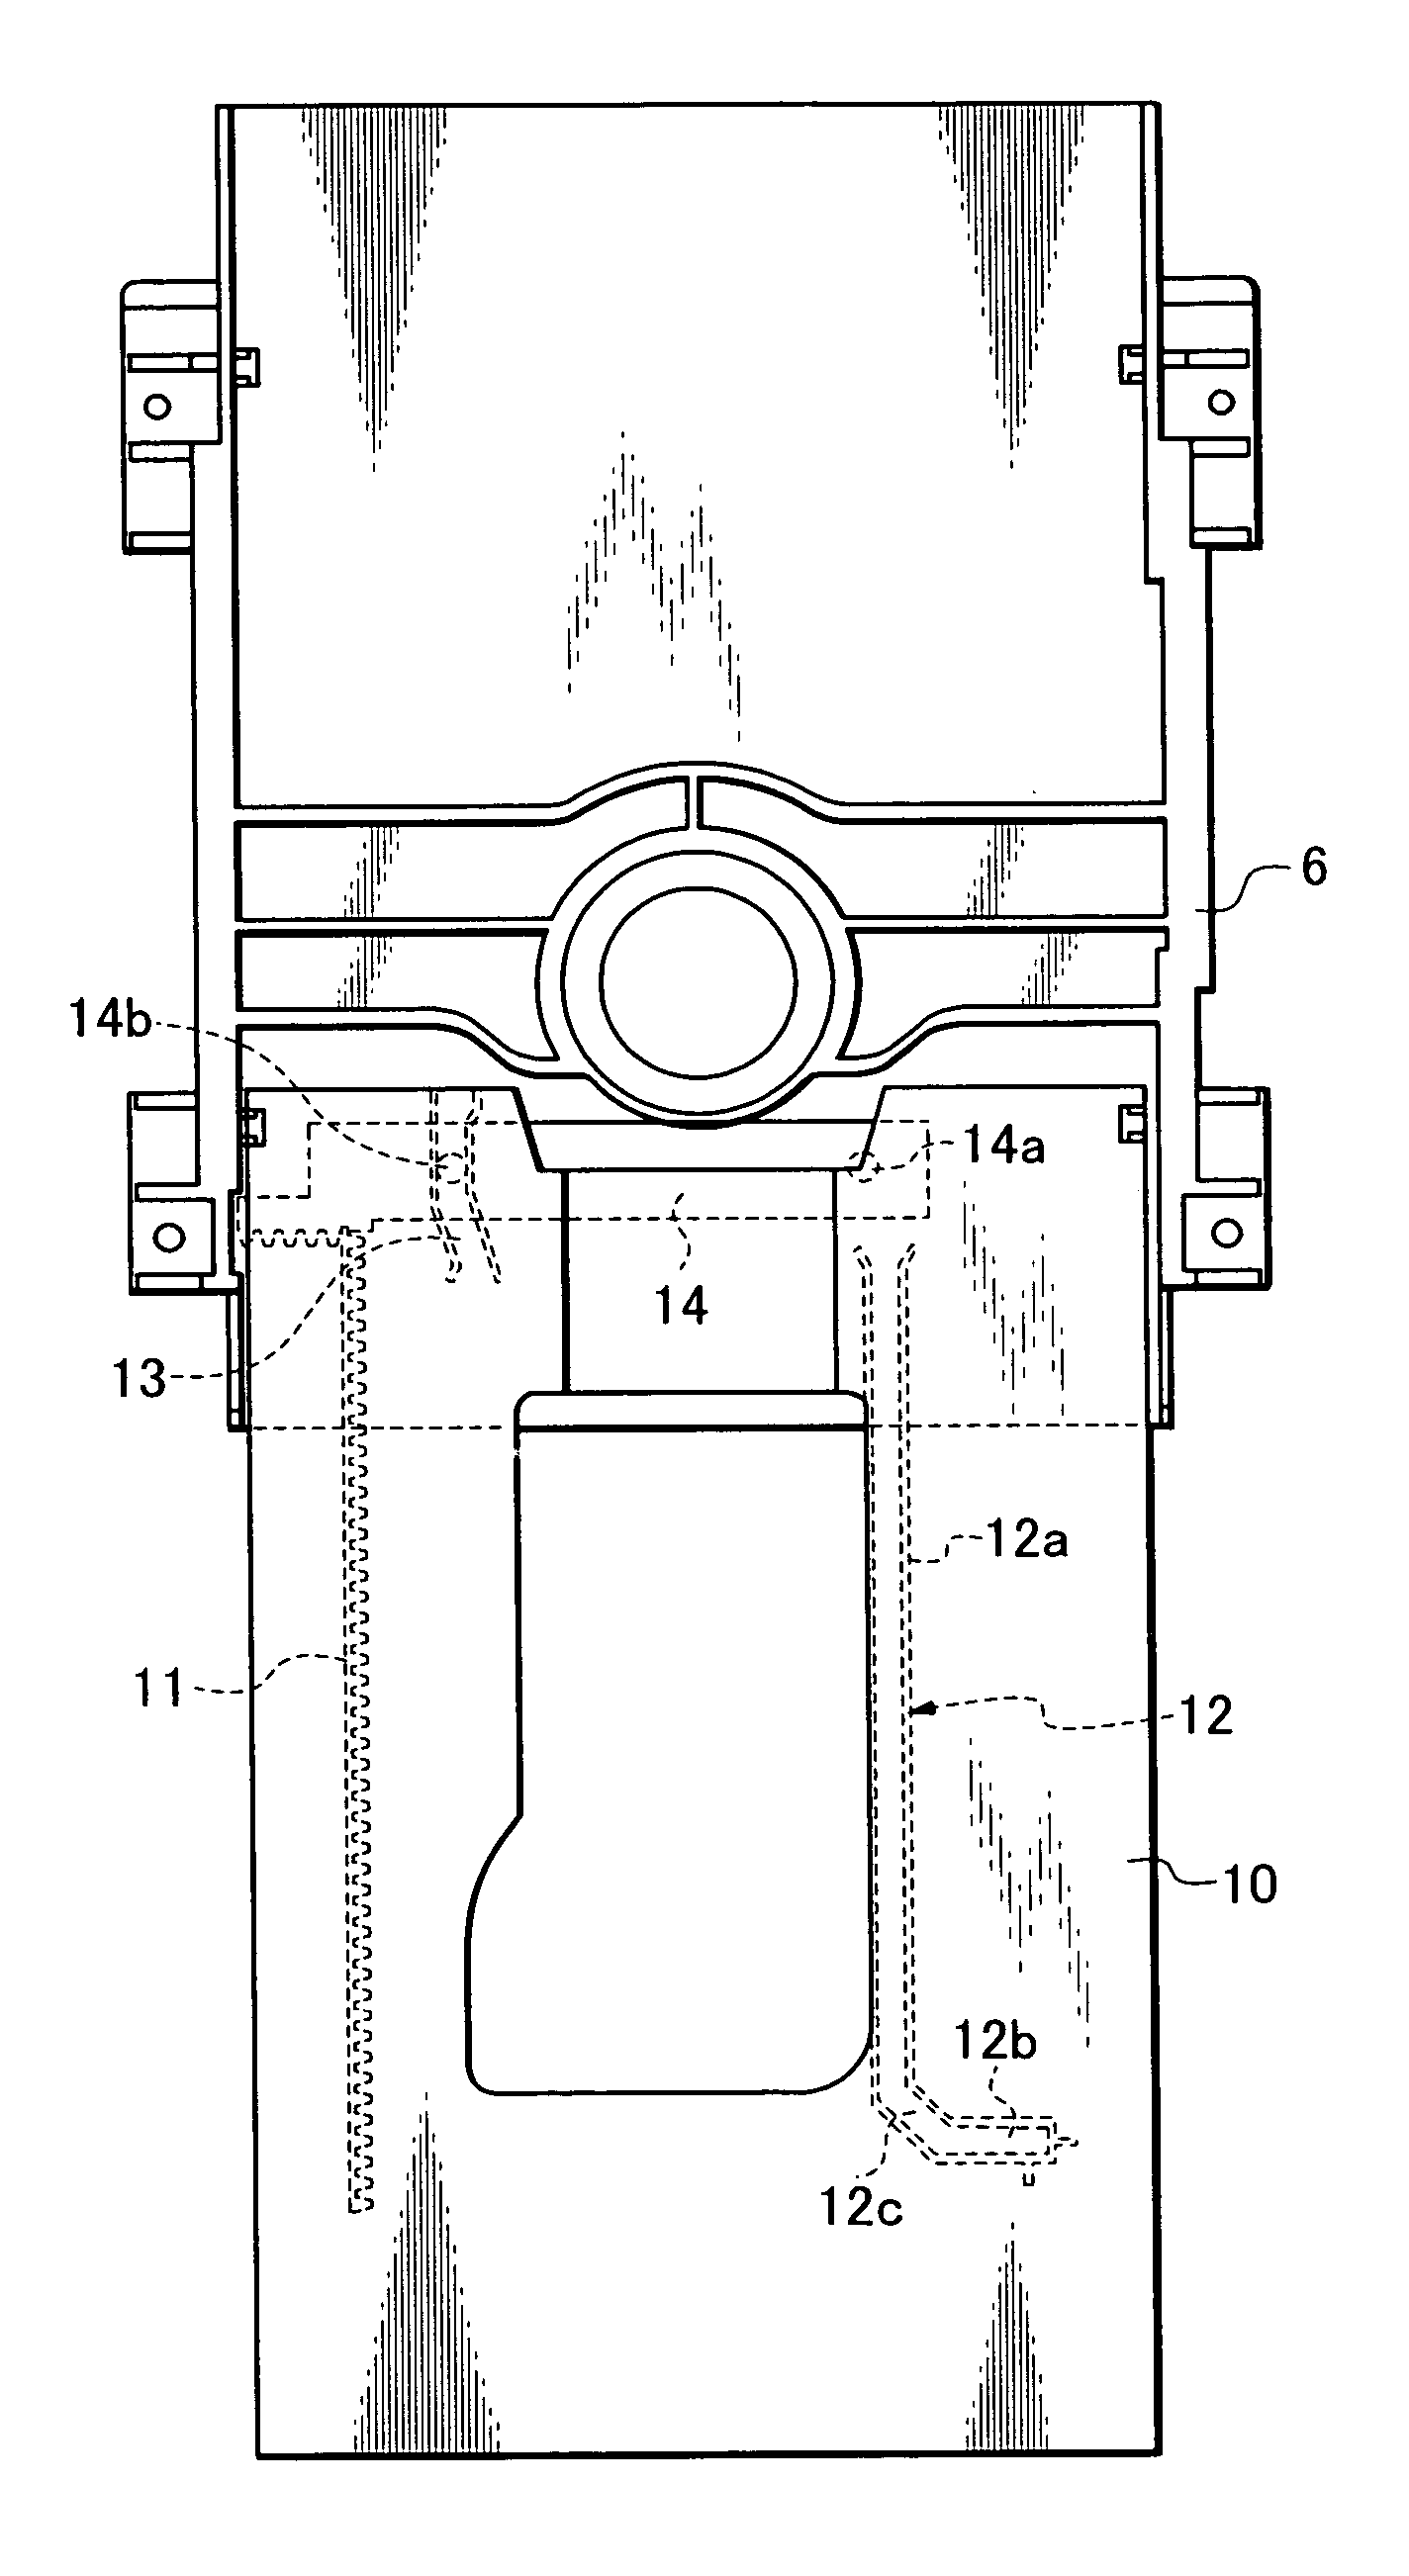 Disk drive having mechanism for preventing tray from rolling